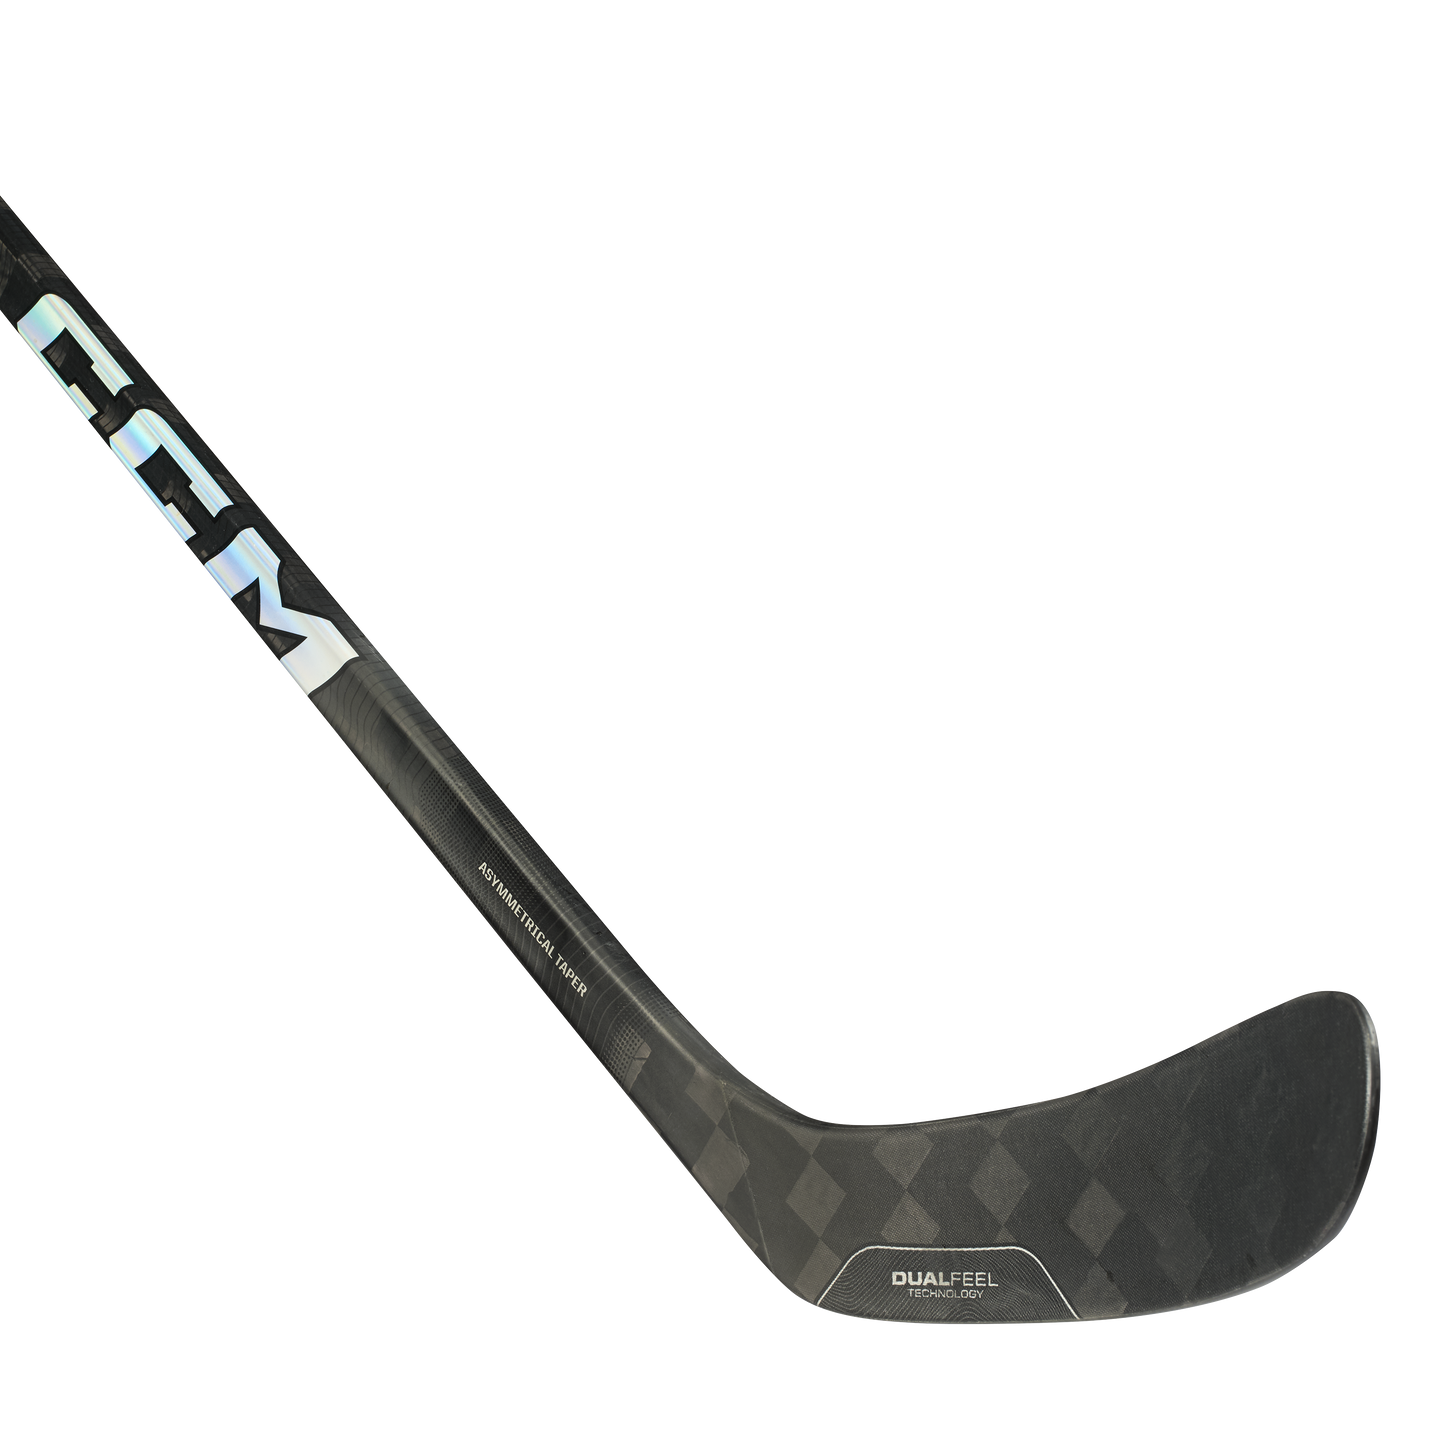 This is a photo of the CCM Ribcor Trigger 8 Pro Chrome Intermediate Hockey Stick